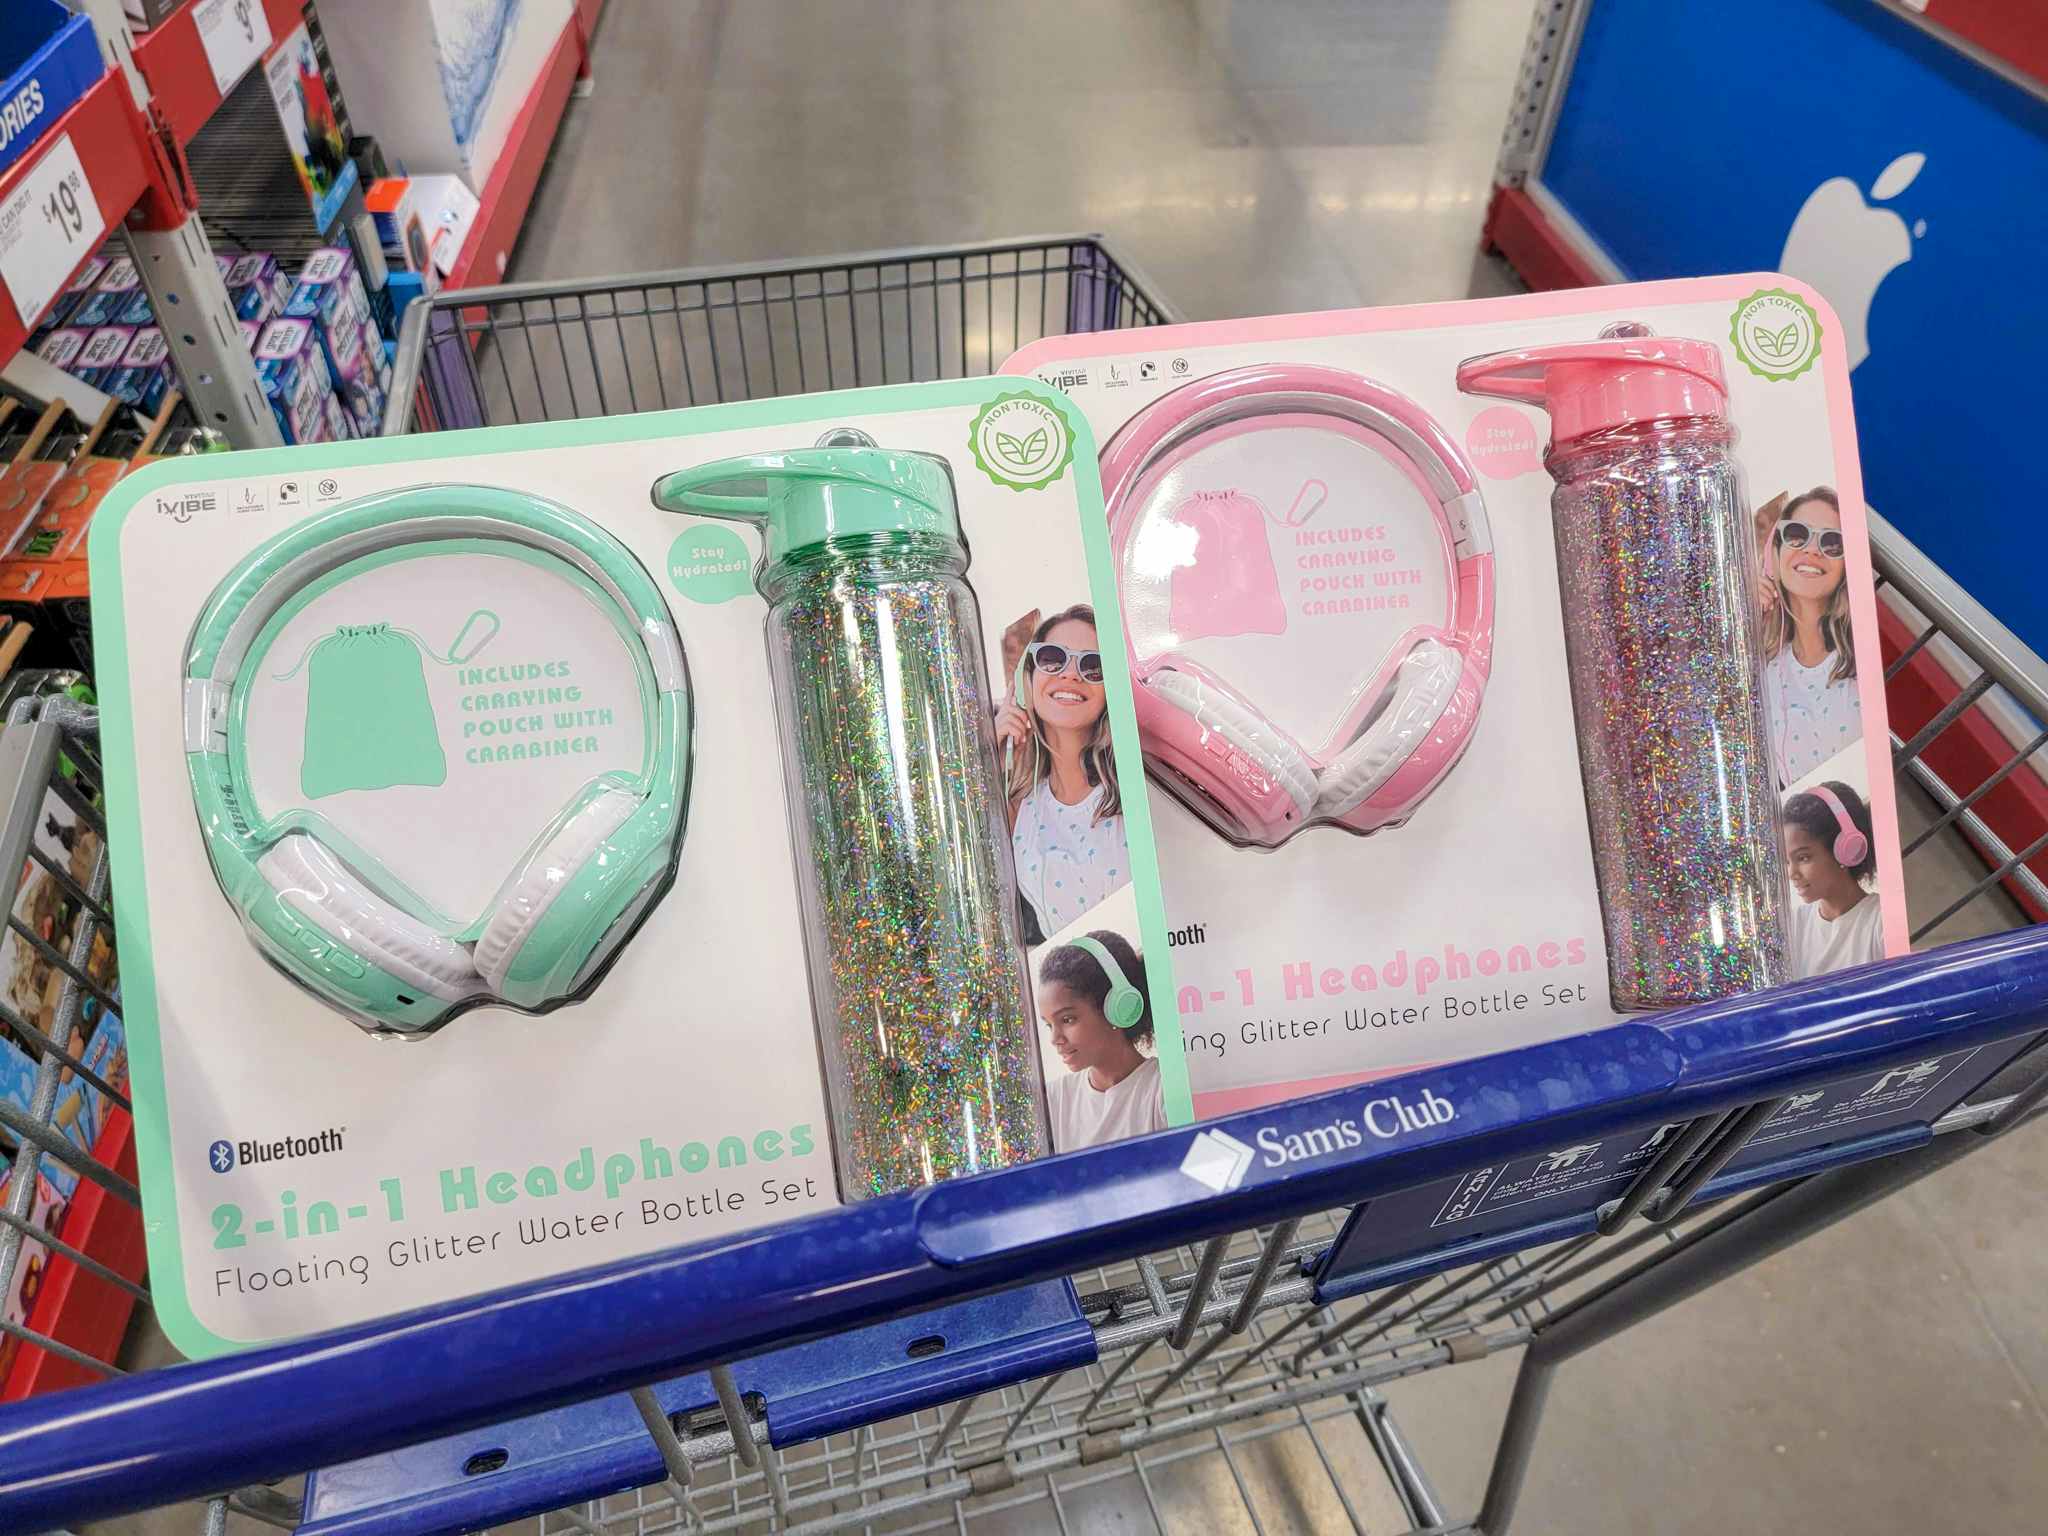 headphone and water bottle sets in a cart